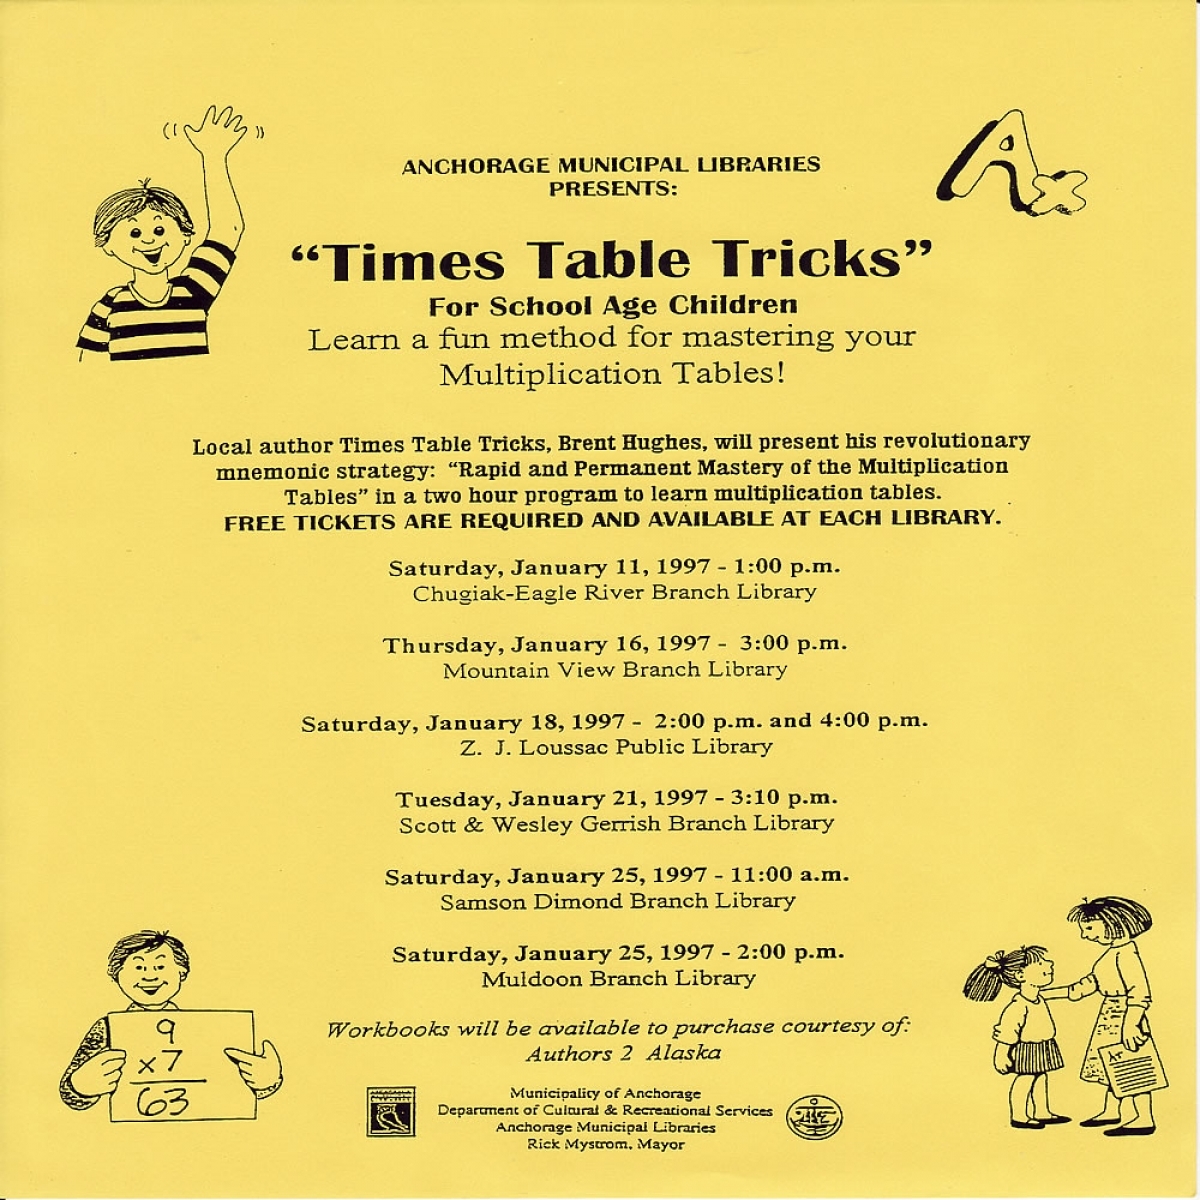 Anchorage Municipal Libraries presents Times Table Ticks